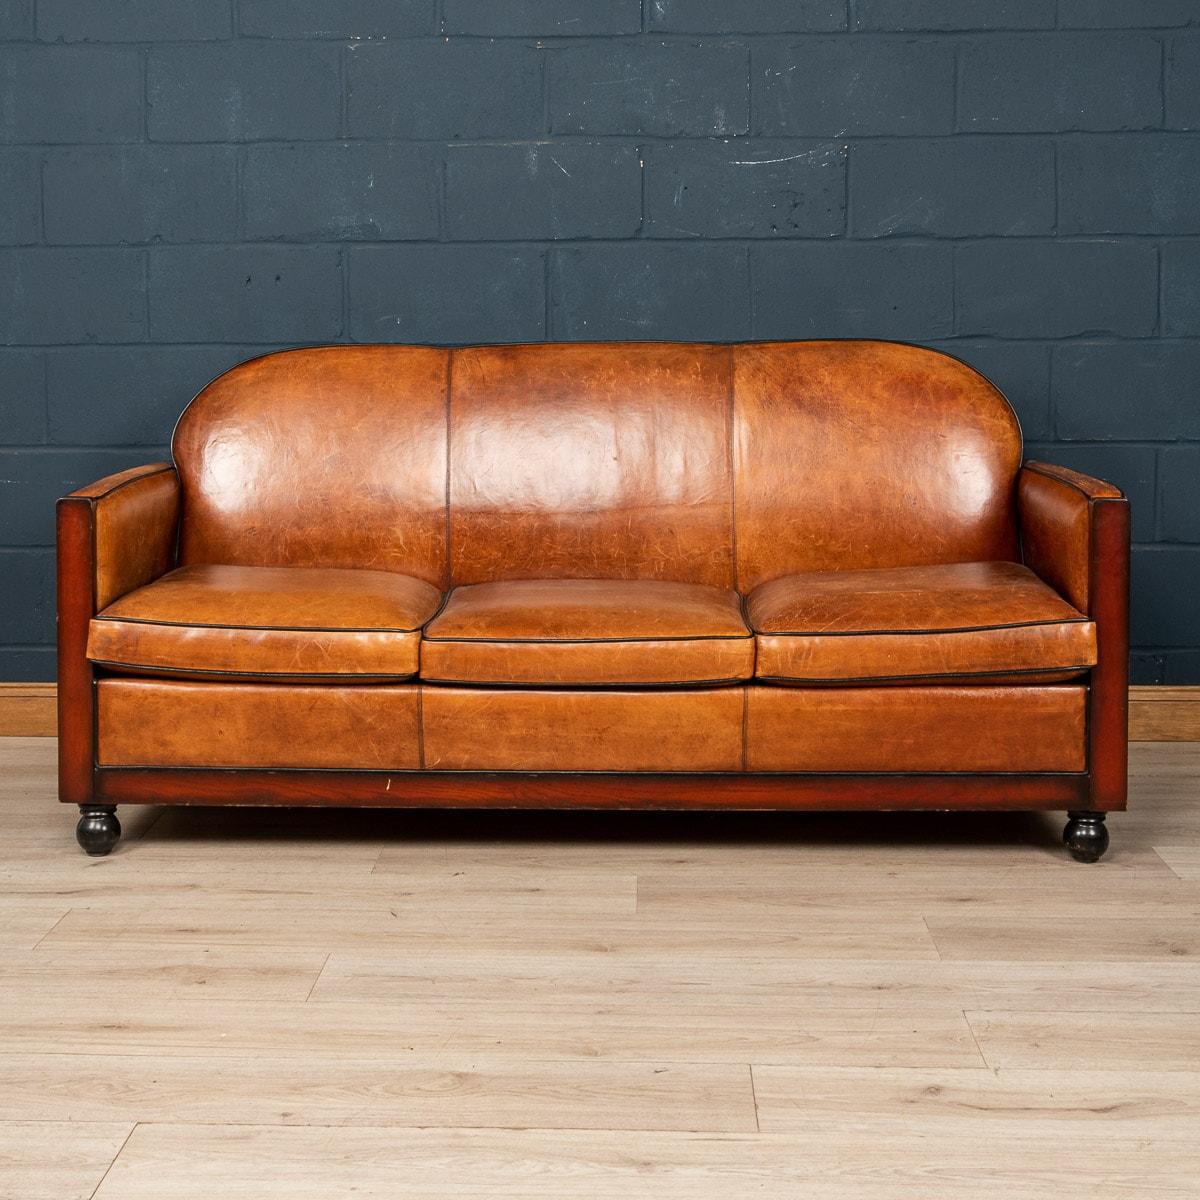 Showing superb patina and colour, this wonderful sofa was hand upholstered in sheepskin leather in Holland by the finest craftsmen in the latter part of the 20th century. This particular model showing strong Art Deco influence thanks to its straight